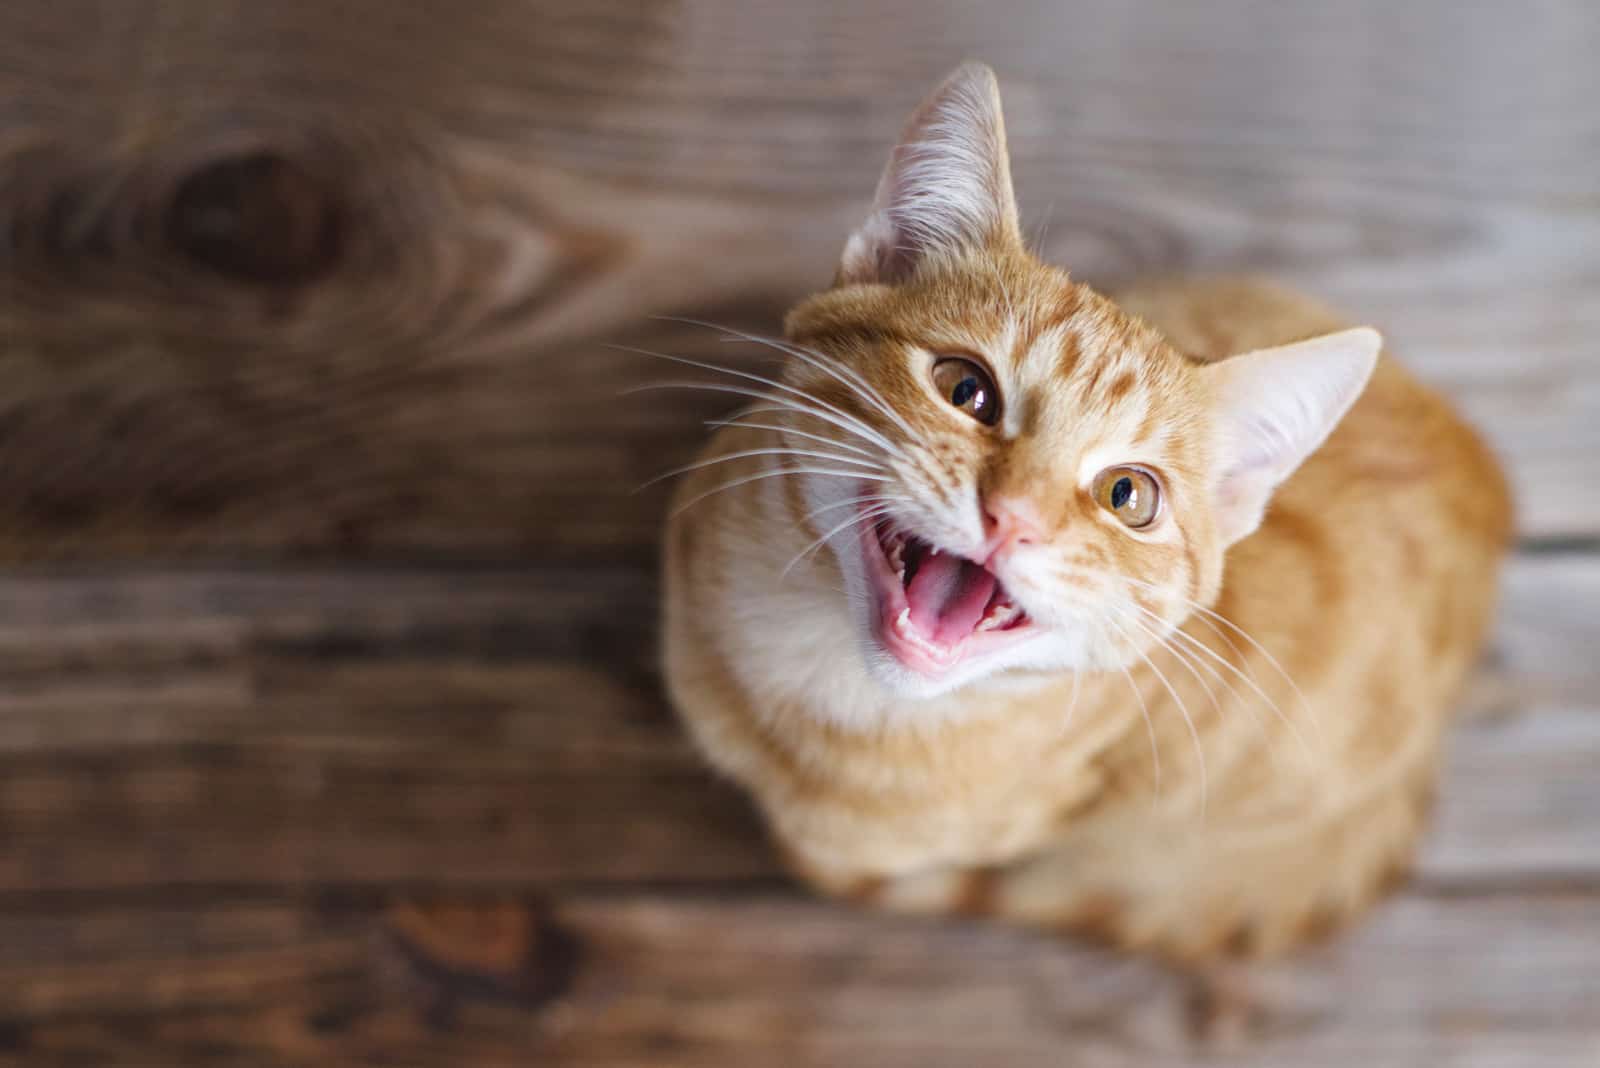 Ginger tabby young cat sitting on a wooden floor and smiling